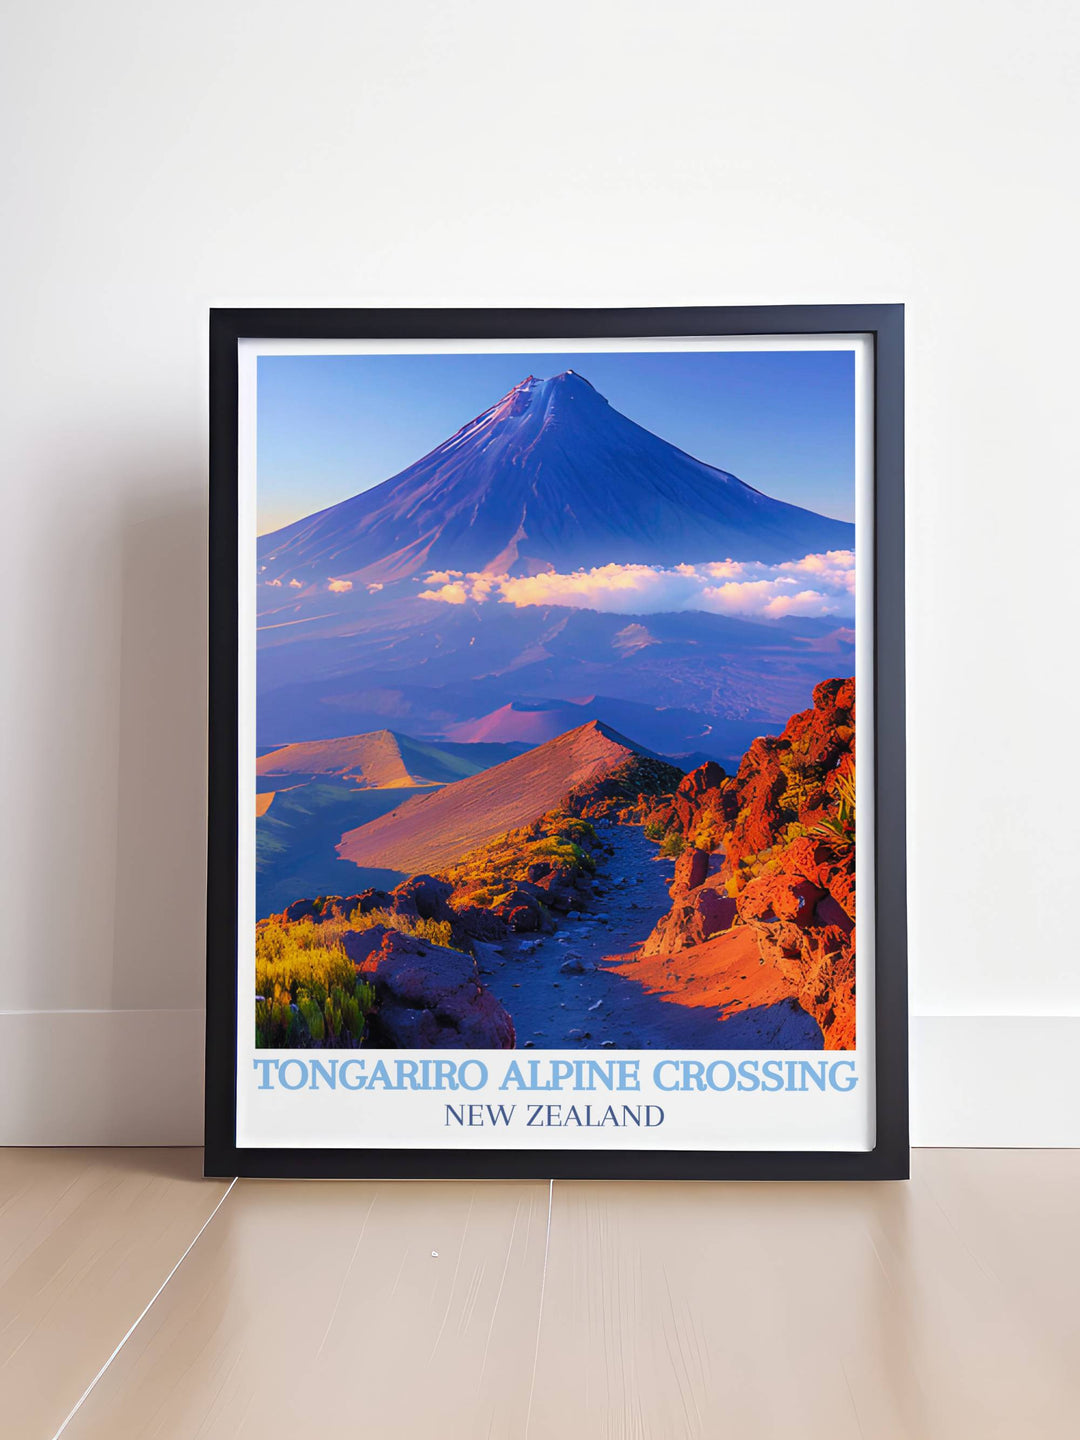 Mount Ngauruhoe wall art capturing the dramatic presence and symmetrical cone of New Zealands iconic volcano, with vivid colors and fine details bringing the natural grandeur into your living space.